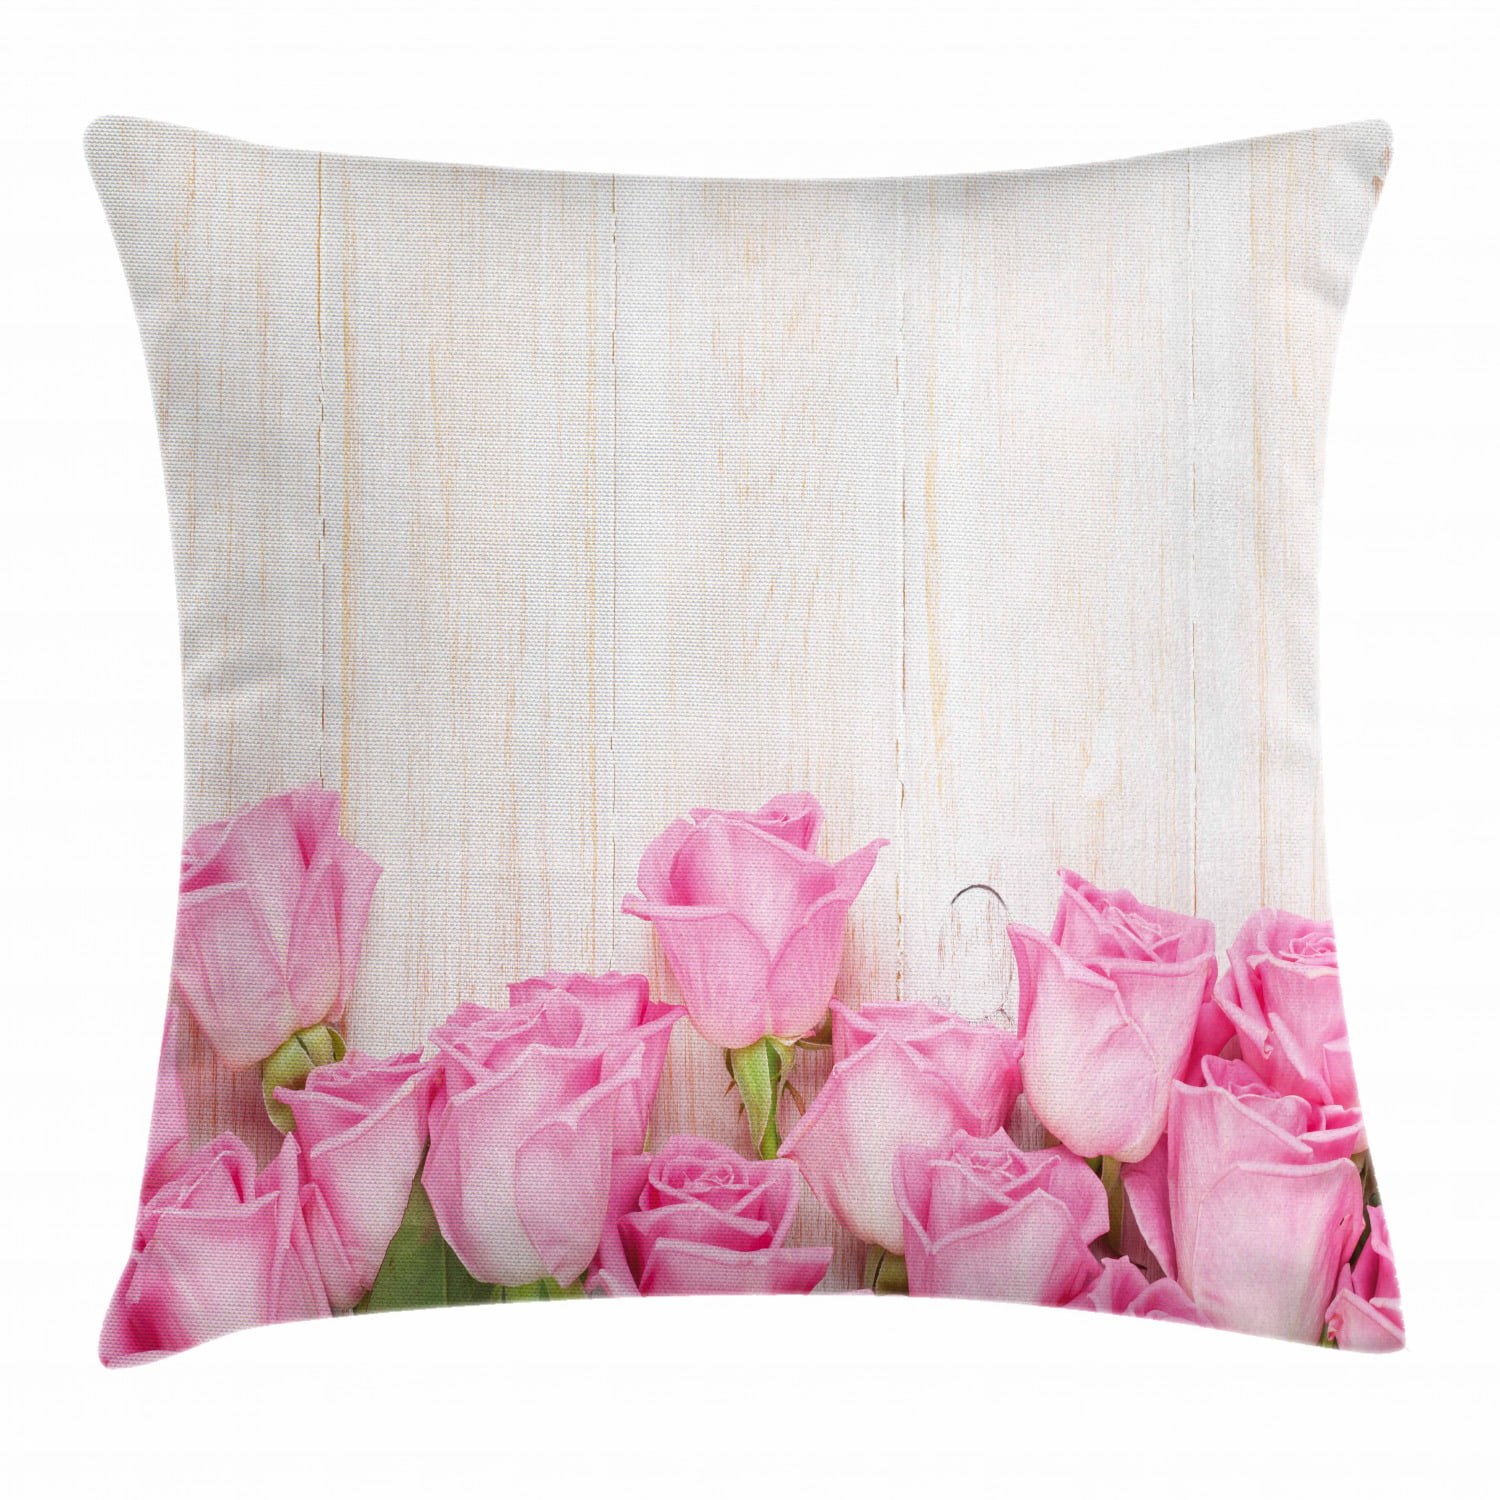 12X12 Inch Rose Digitally Printed Cushion Cover Pink Square Throw Pillow Case 